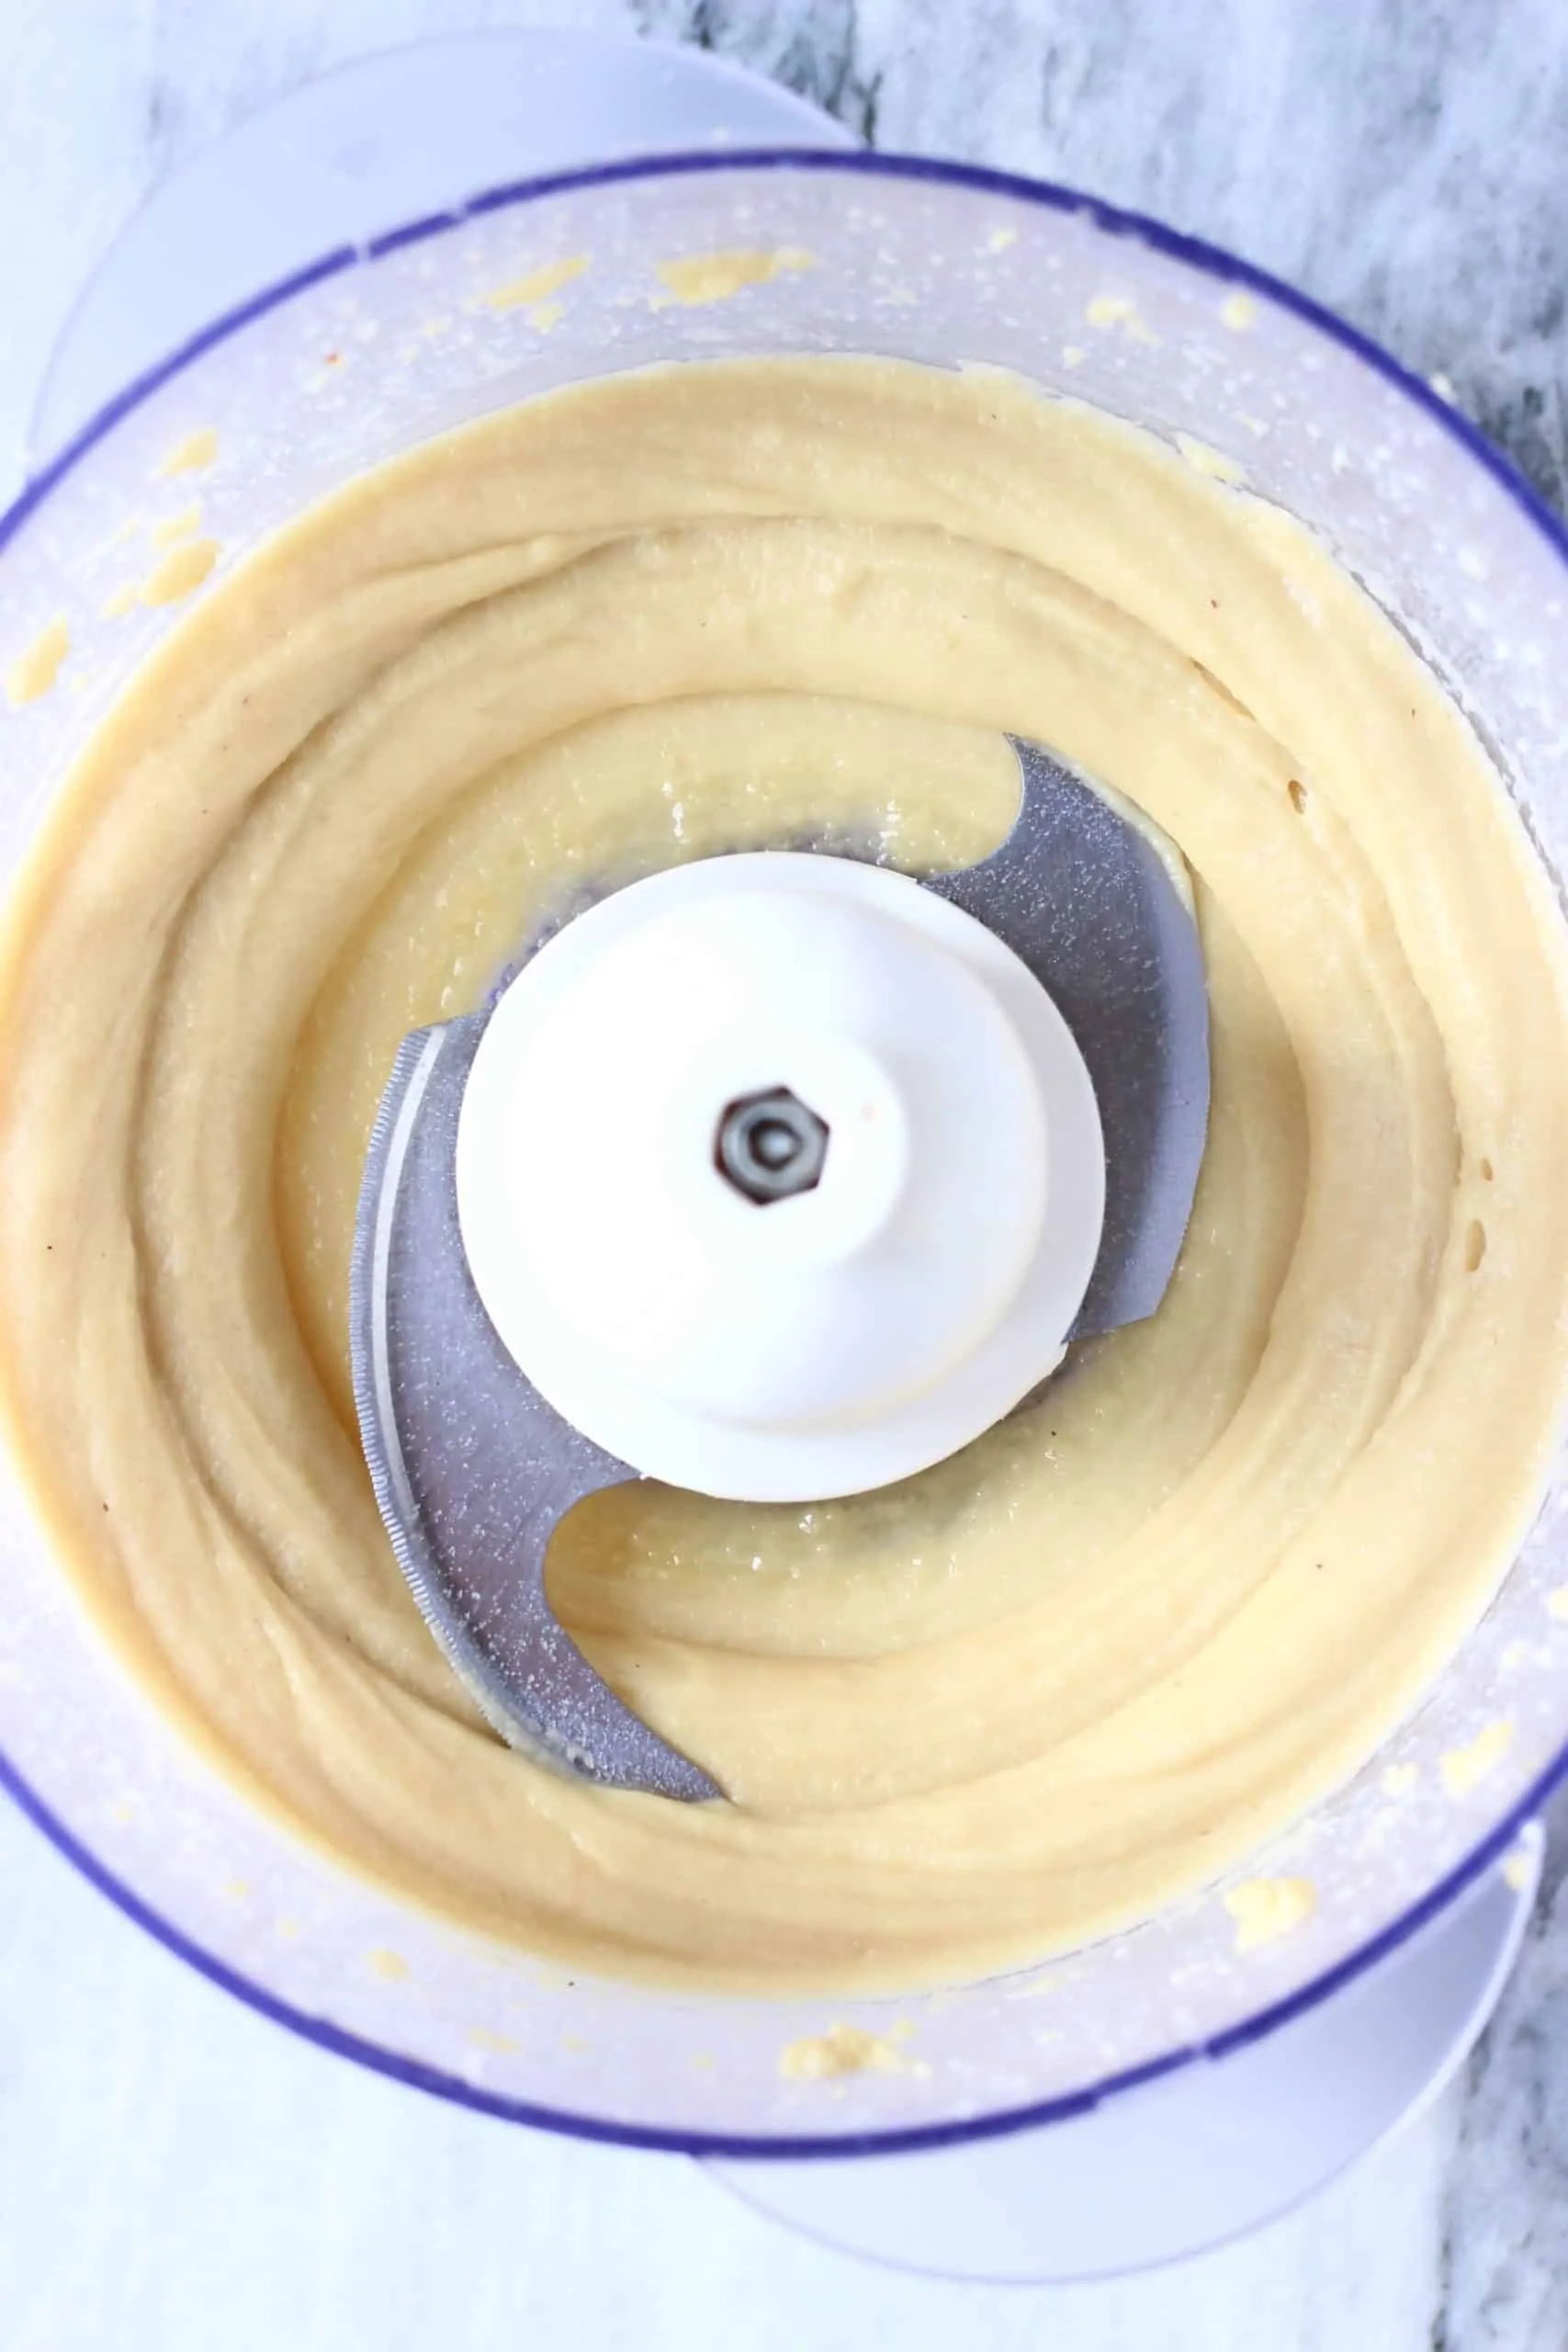 Blended cashew nuts in a food processor